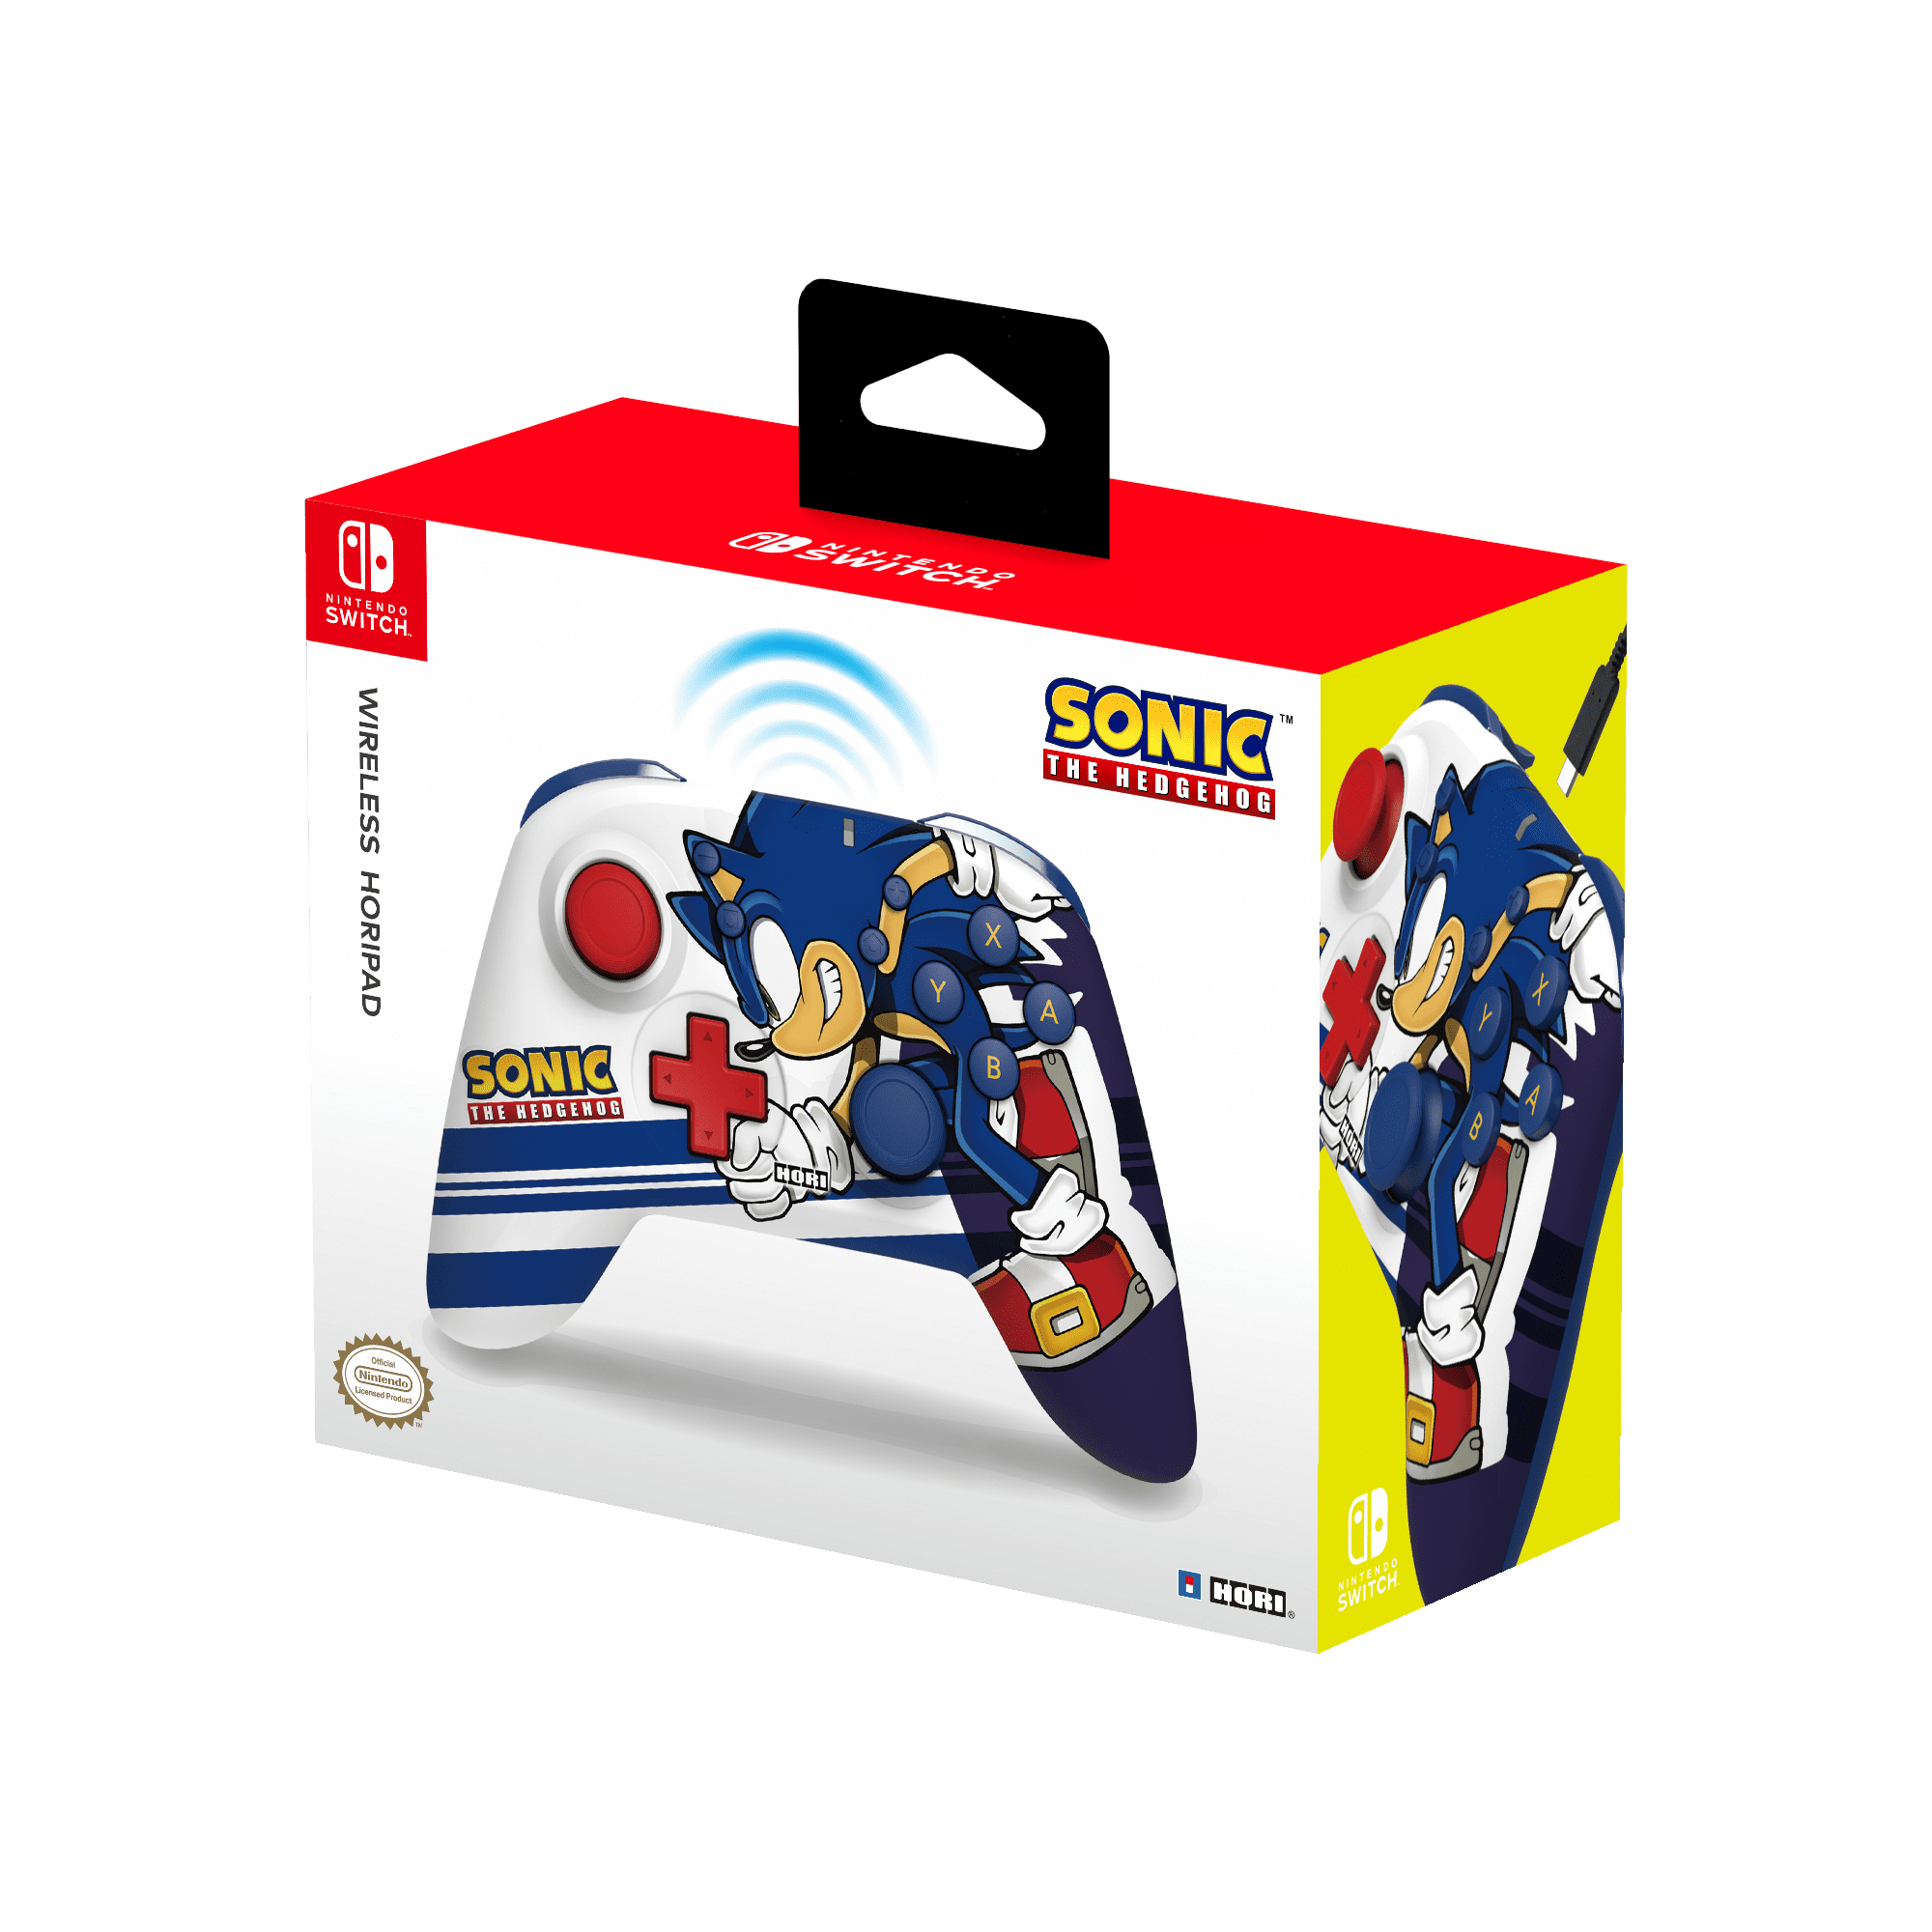 Hori Switch Split Pad Compact Controller - Sonic the Hedgehog 